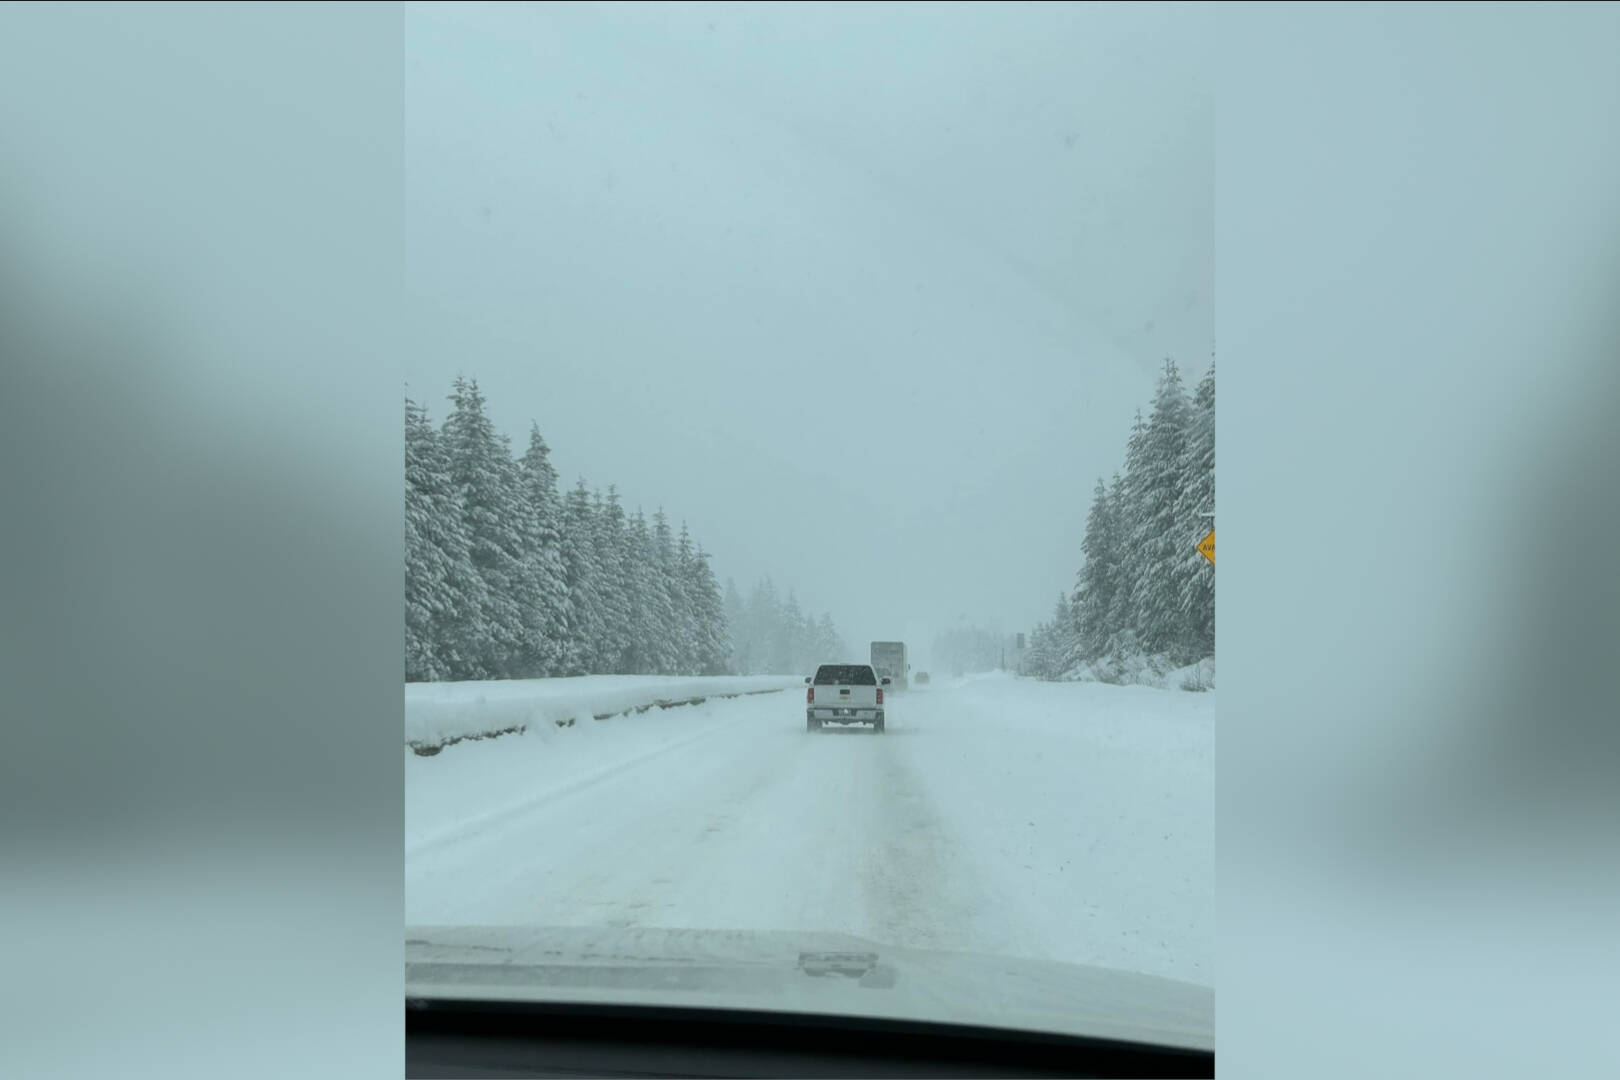 The Coquihalla Highway continues to be closed due to severe winter weather. (Jessica Okert/Facebook)